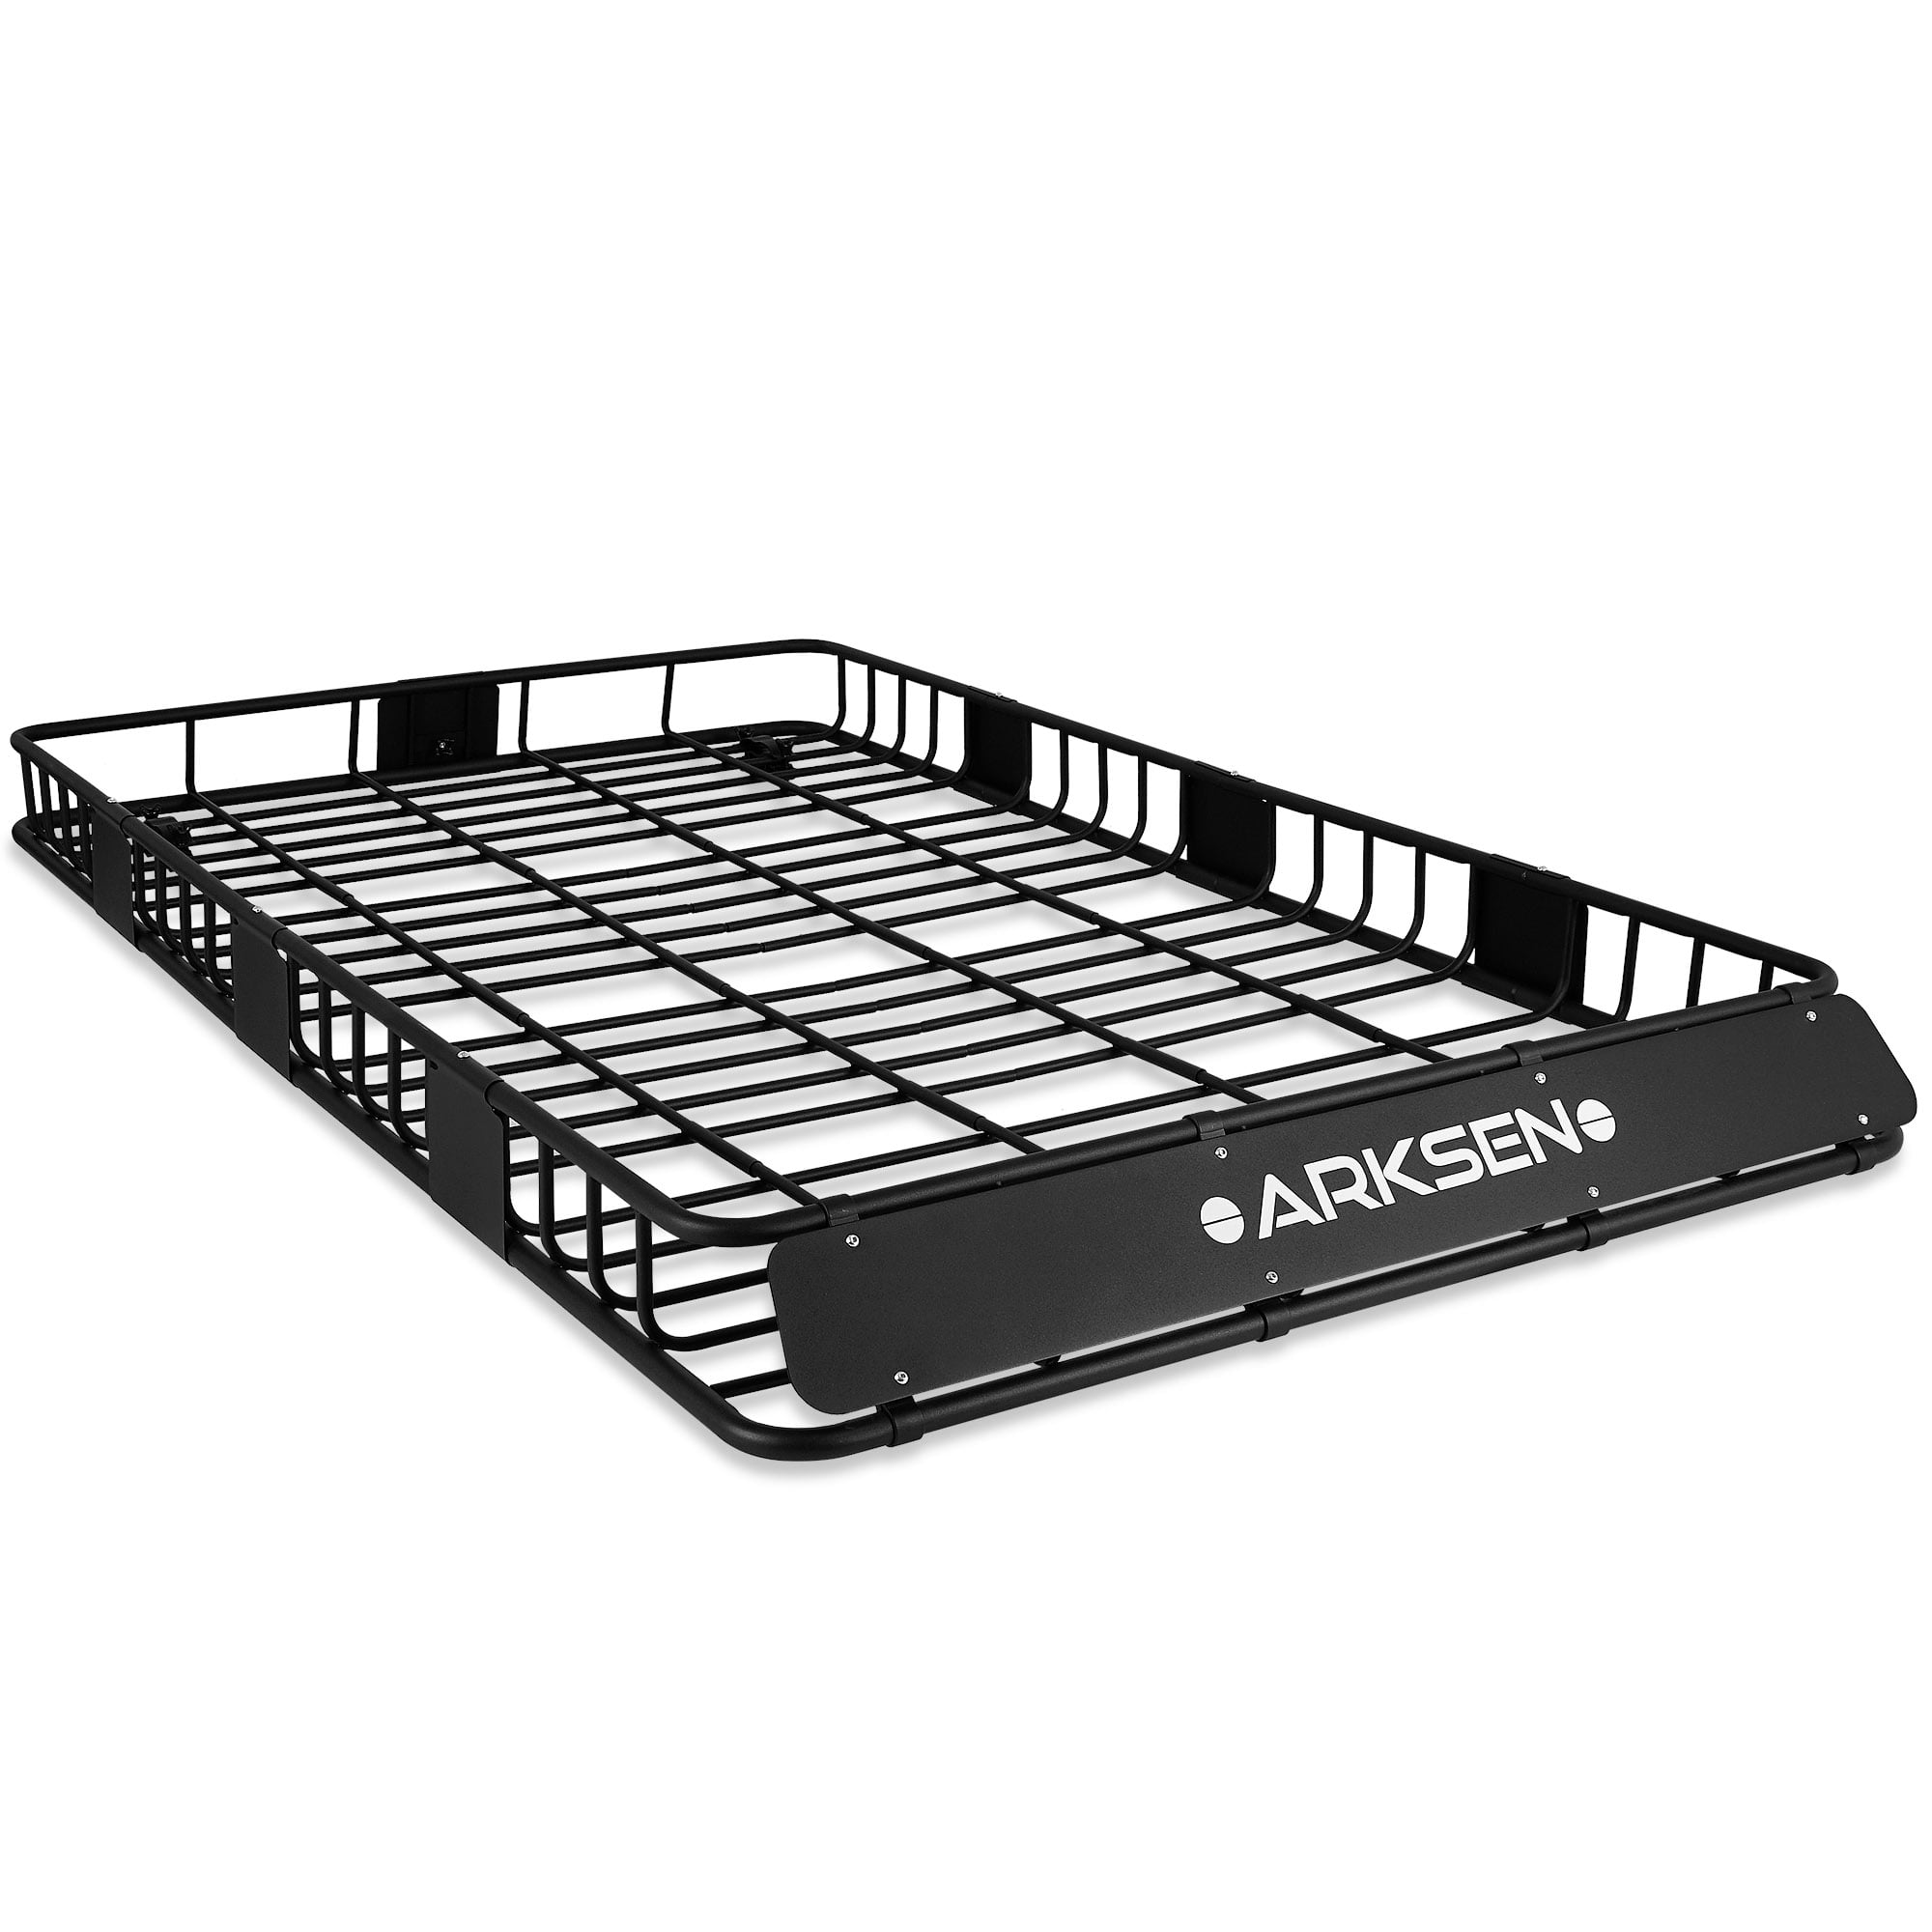 ARKSEN 84" x 50" x 6" Perfect-Wide Roof Rack Cargo Basket 150 lb.  Capacity Full-size SUV Heavy Duty Roof Top Luggage Carrier, Black 